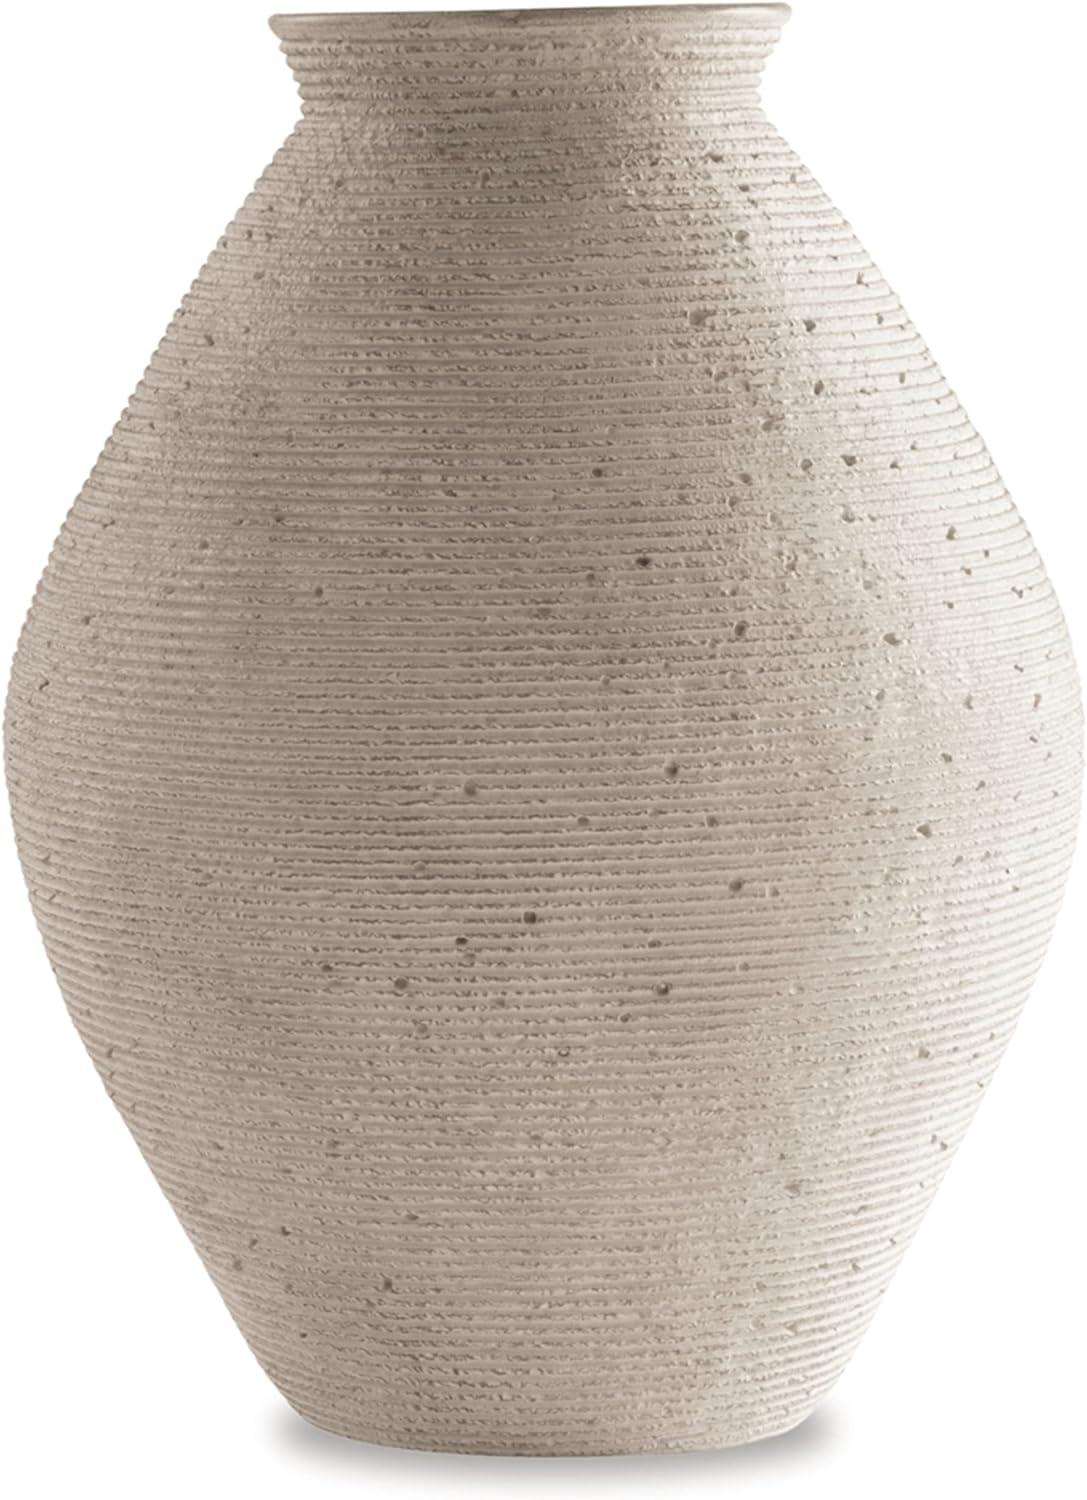 Contemporary 17" Beige Ribbed Plastic Vase with Artisanal Rings